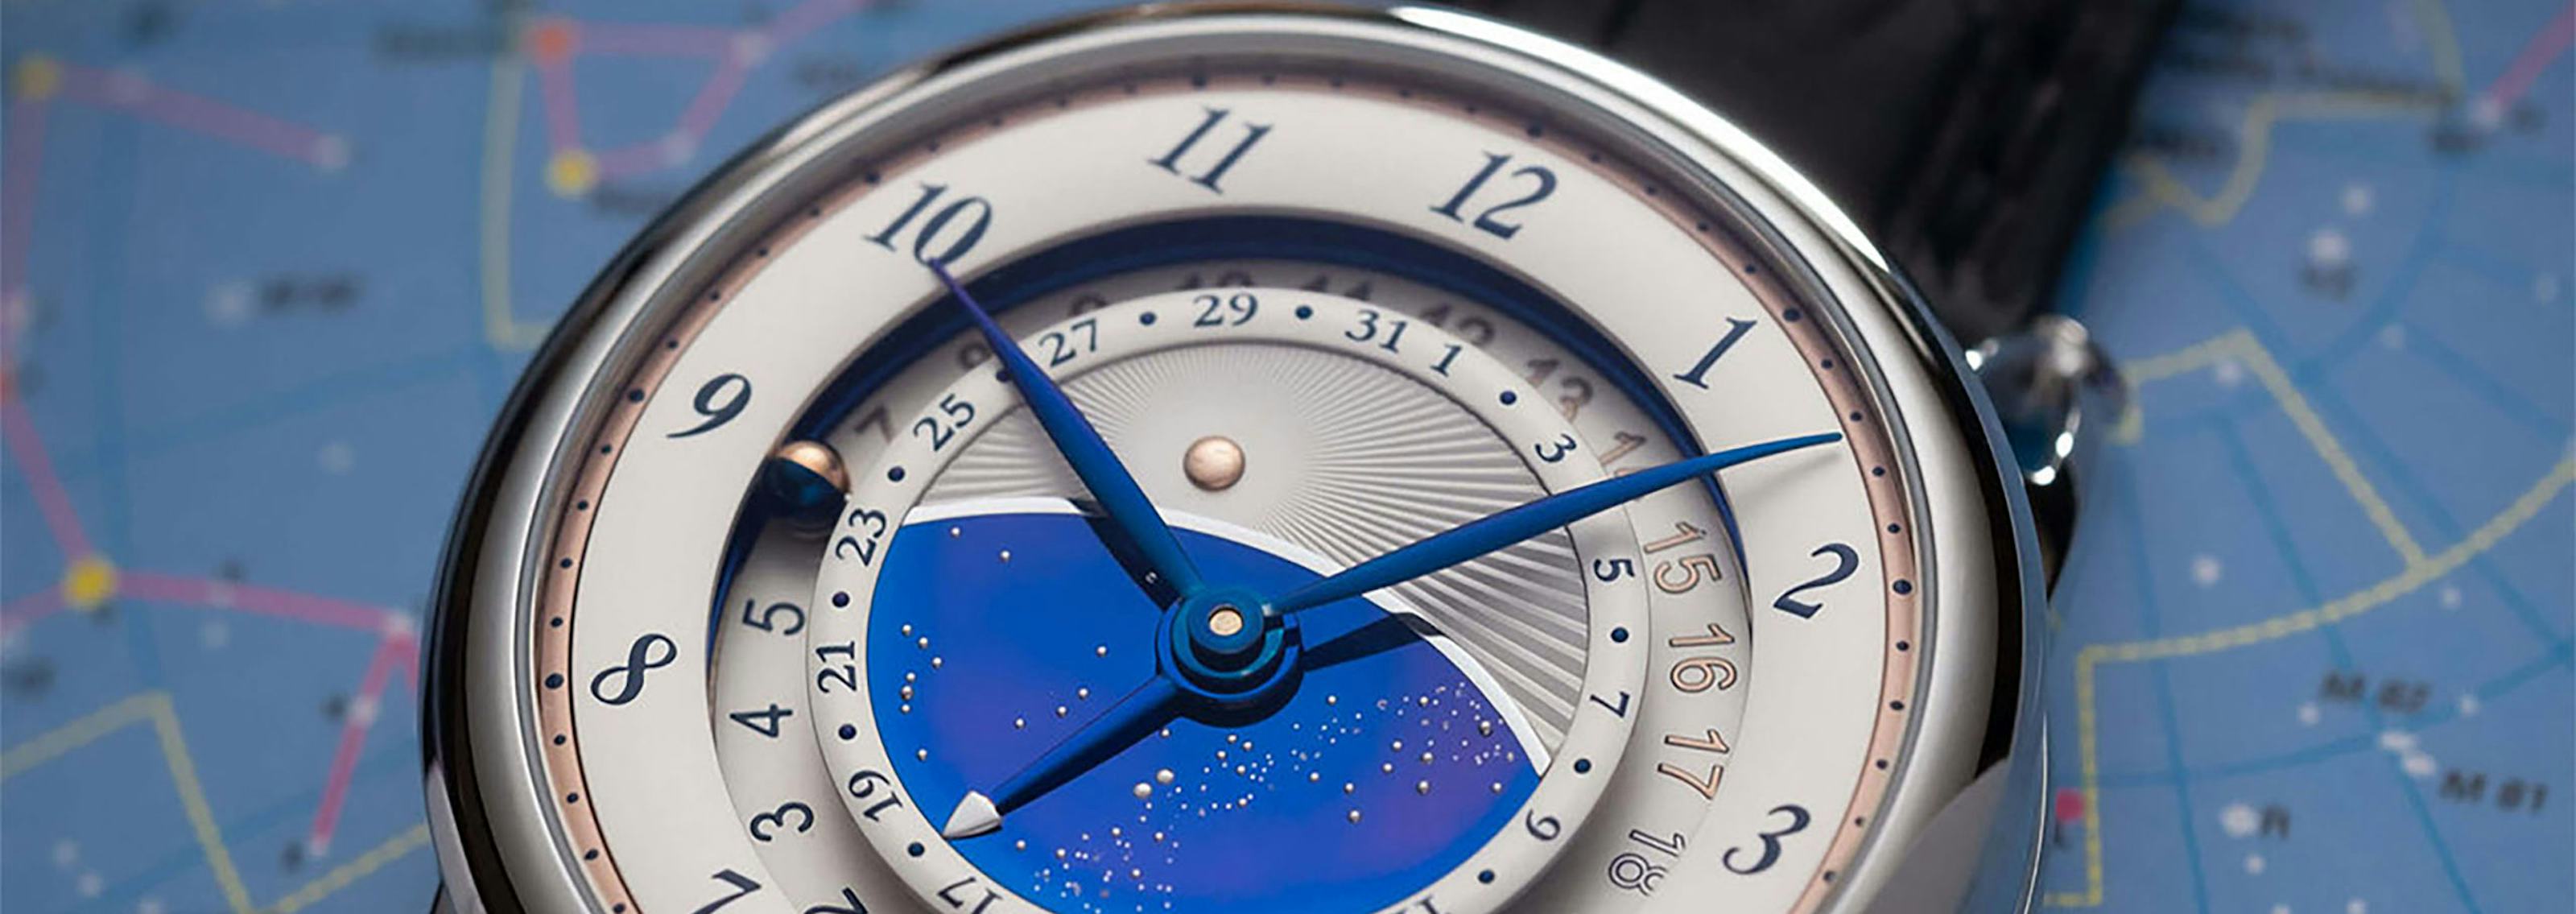 Coming To Our Retrospective Exhibition In Dubai: Three New Masterpieces From De Bethune